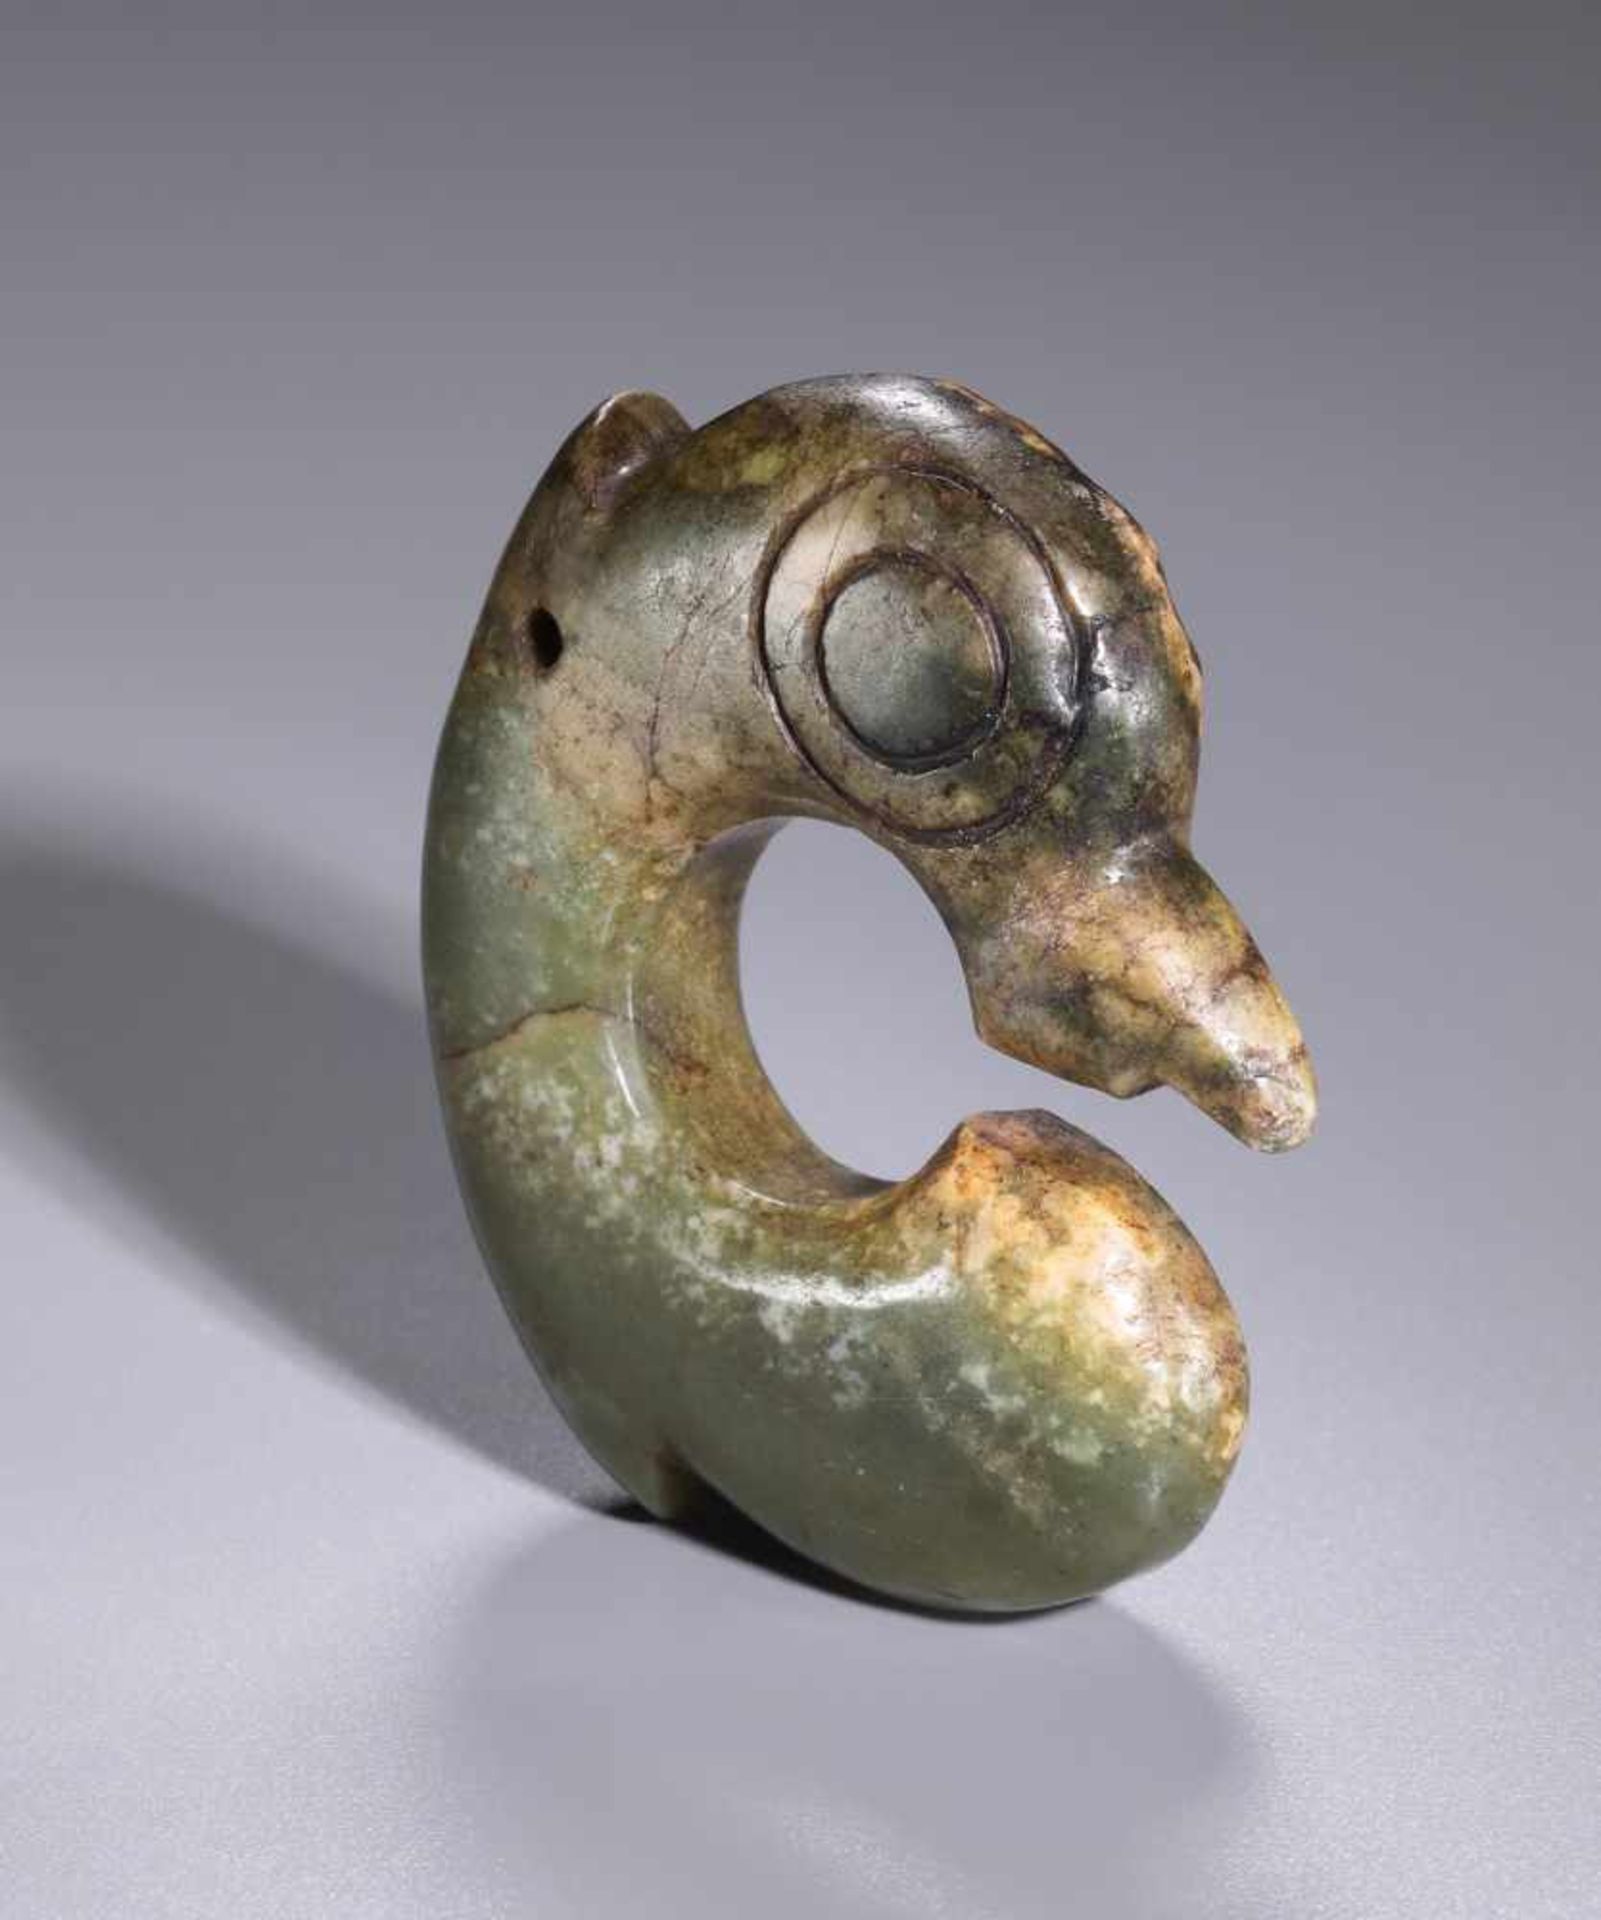 A VERY RARE HONGSHAN CARVING OF A BIRD-LIKE CREATURE Jade. China, Late Neolithic period, Hongshan - Image 7 of 14